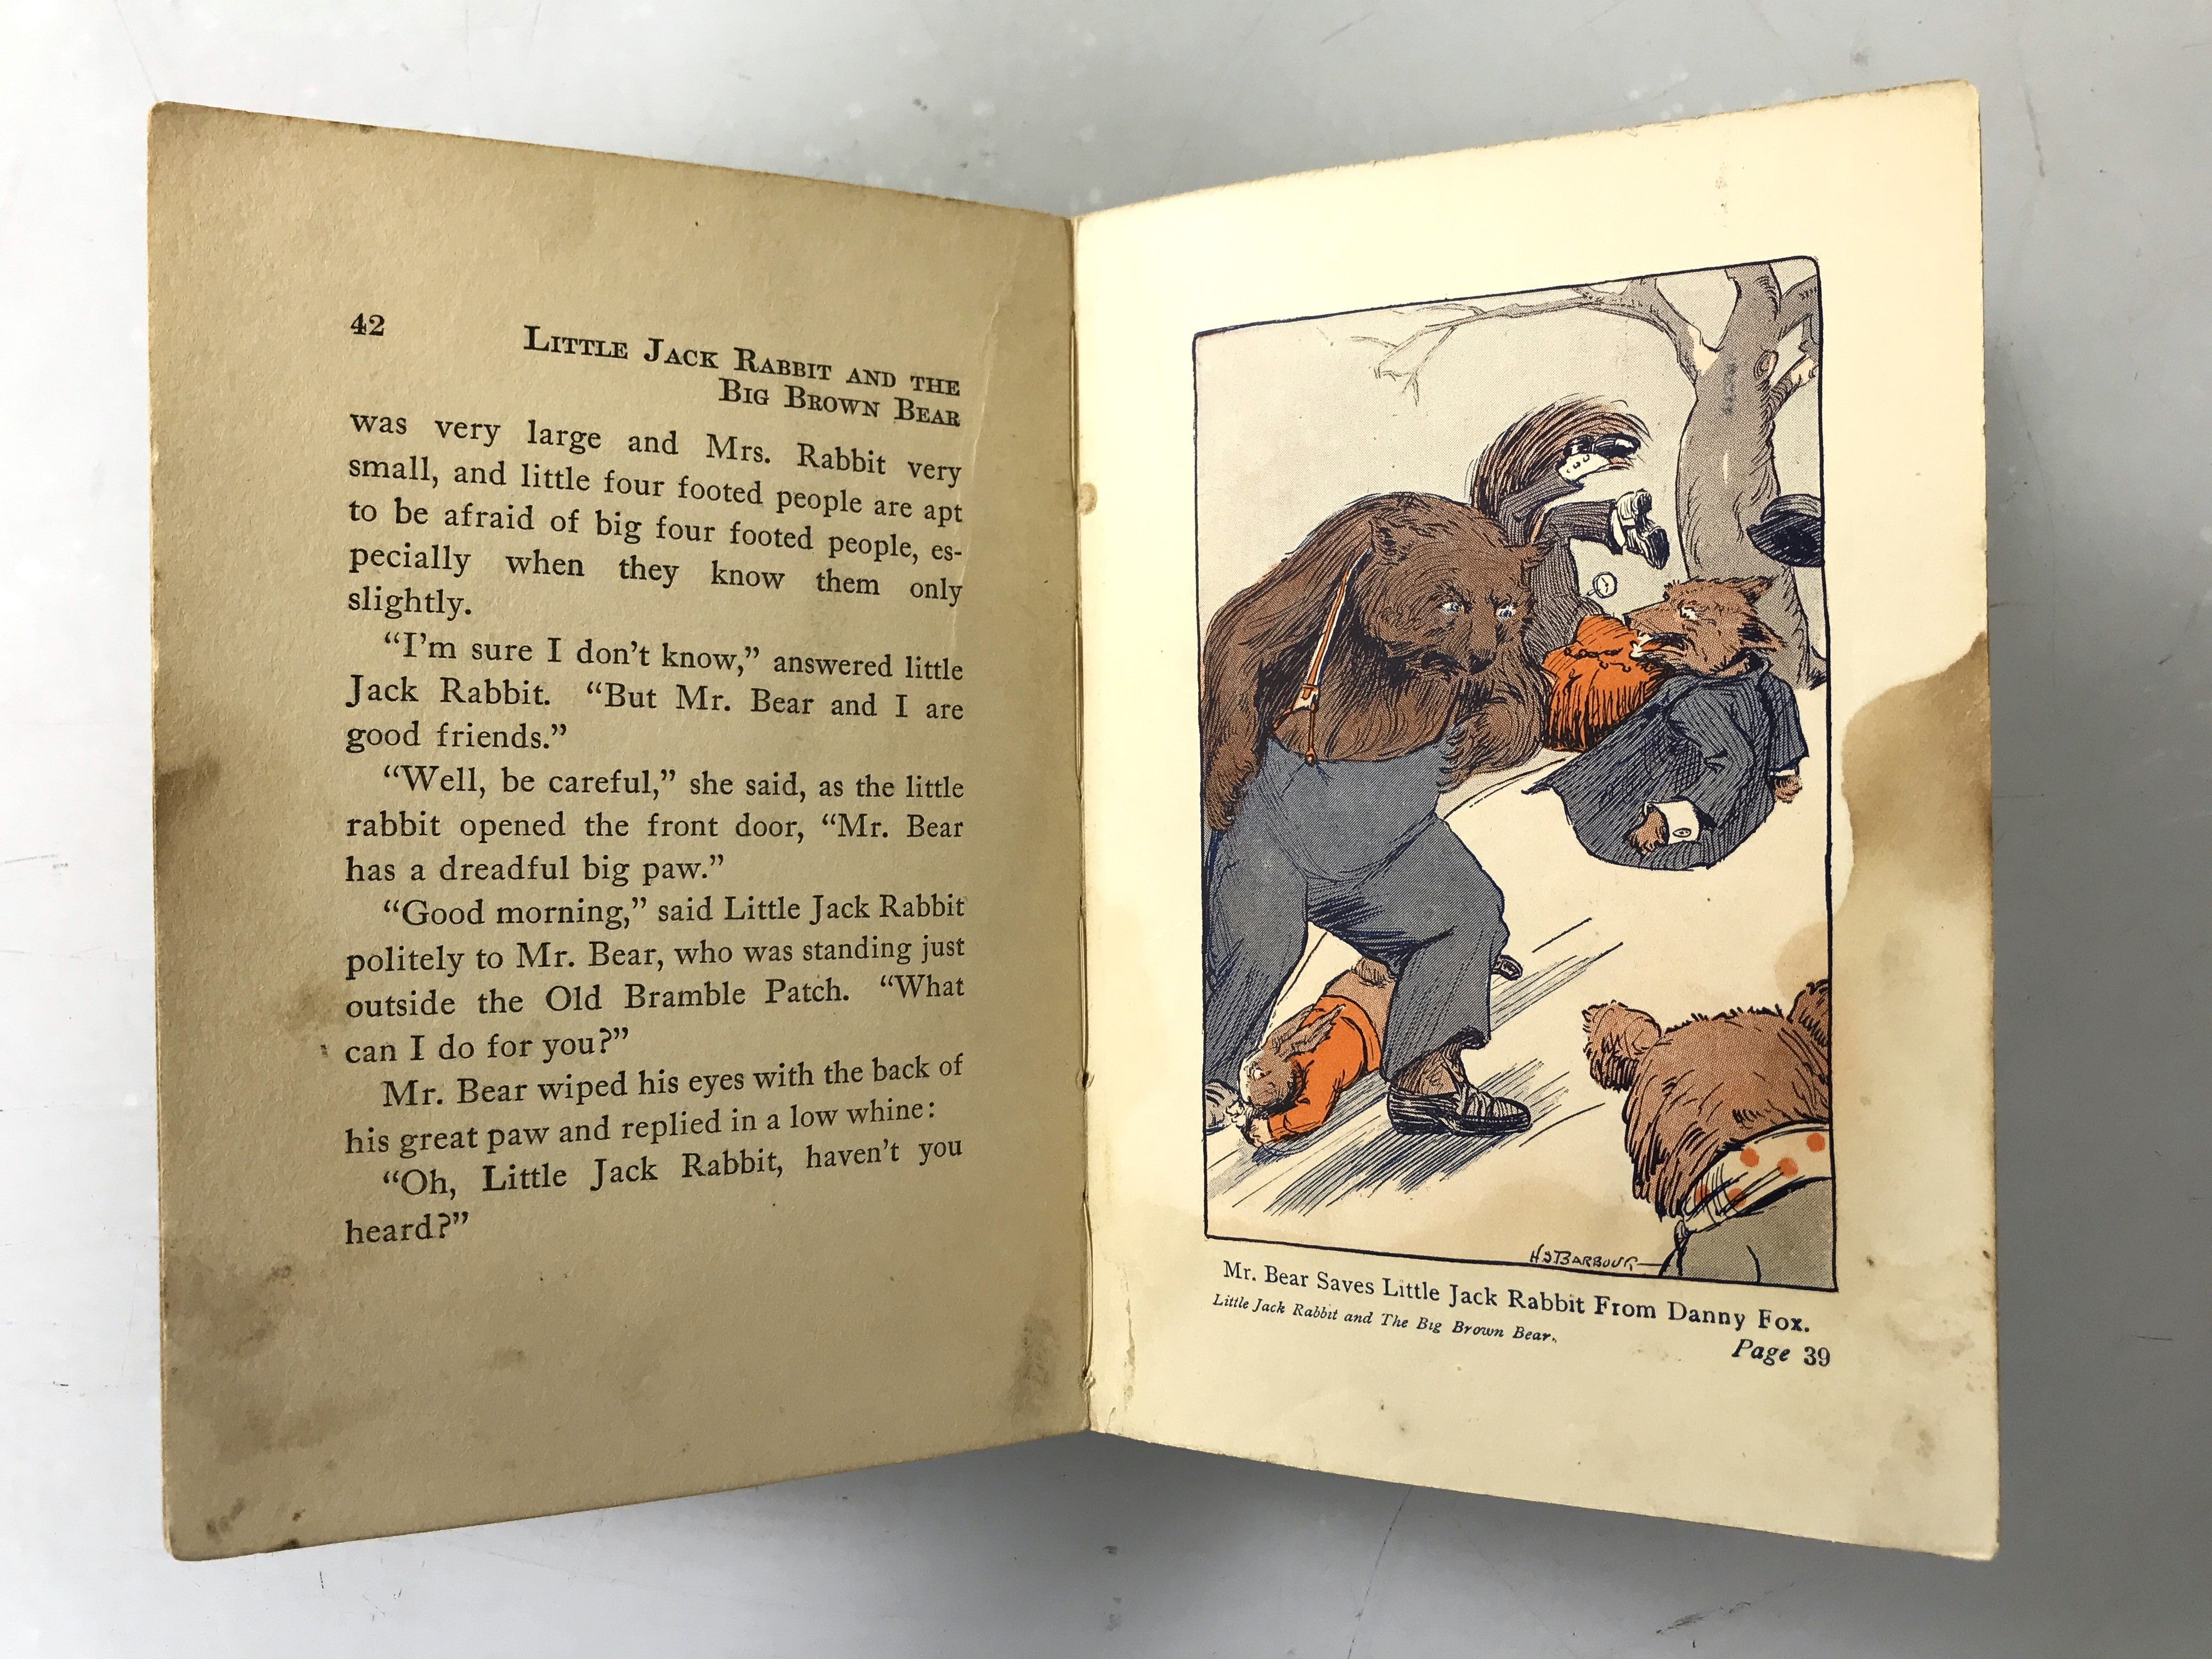 Little Jack Rabbit and the Big Brown Bear by David Cory 1921 HC